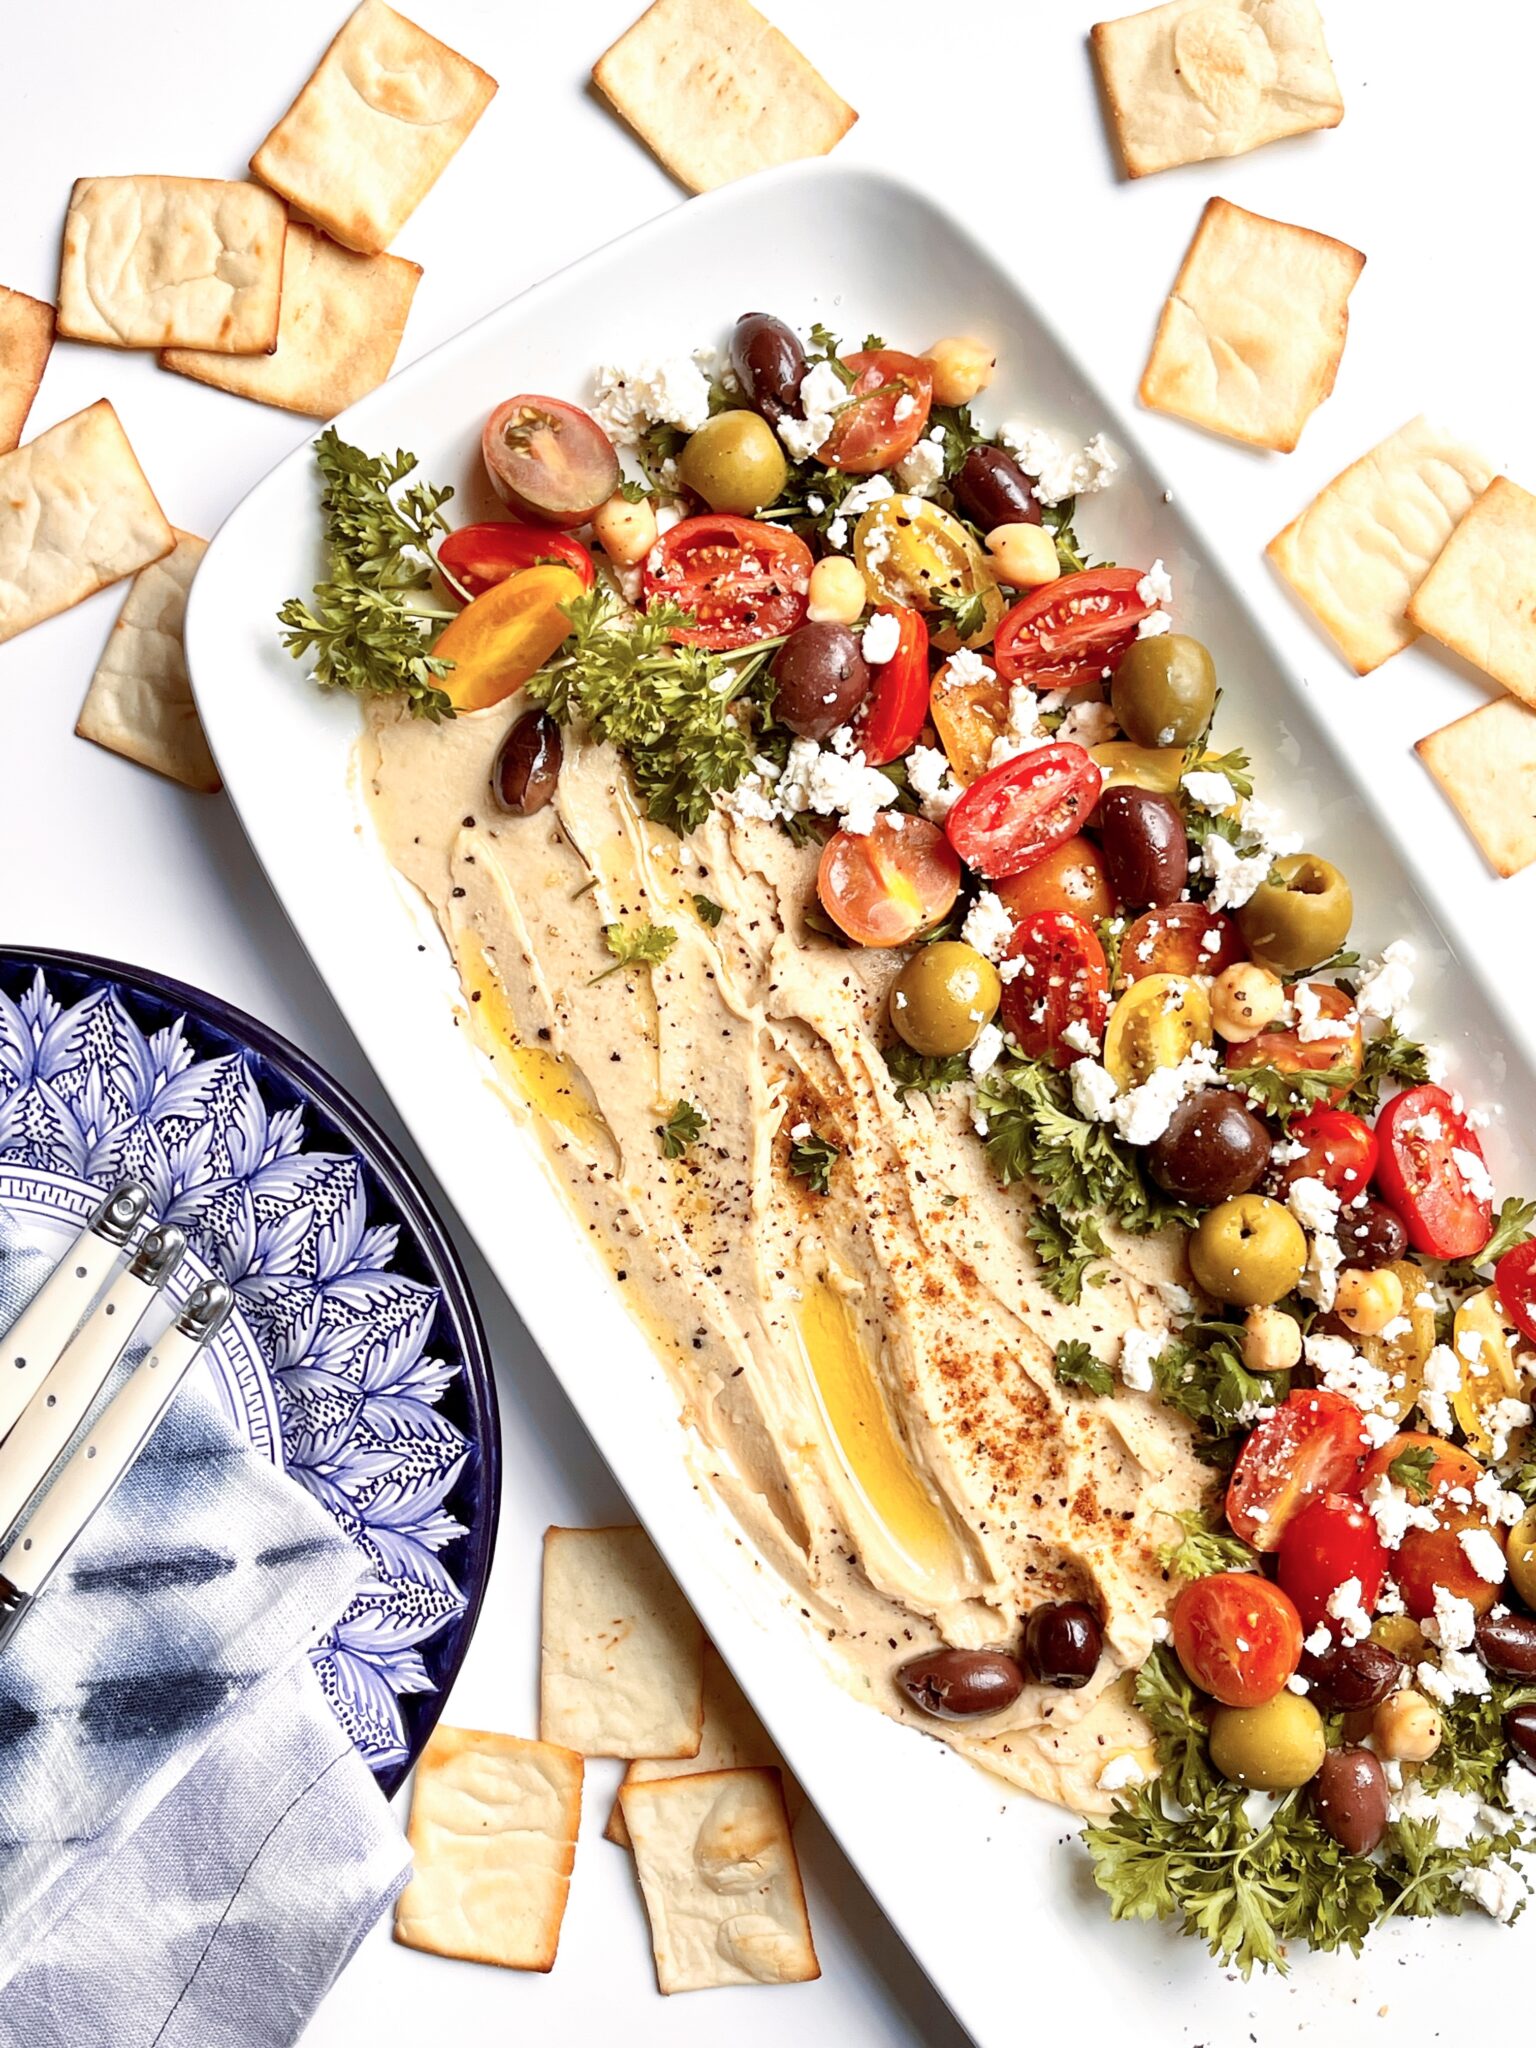 A Mediterranean Loaded Hummus Platter An Easy and Delicious Appetizer